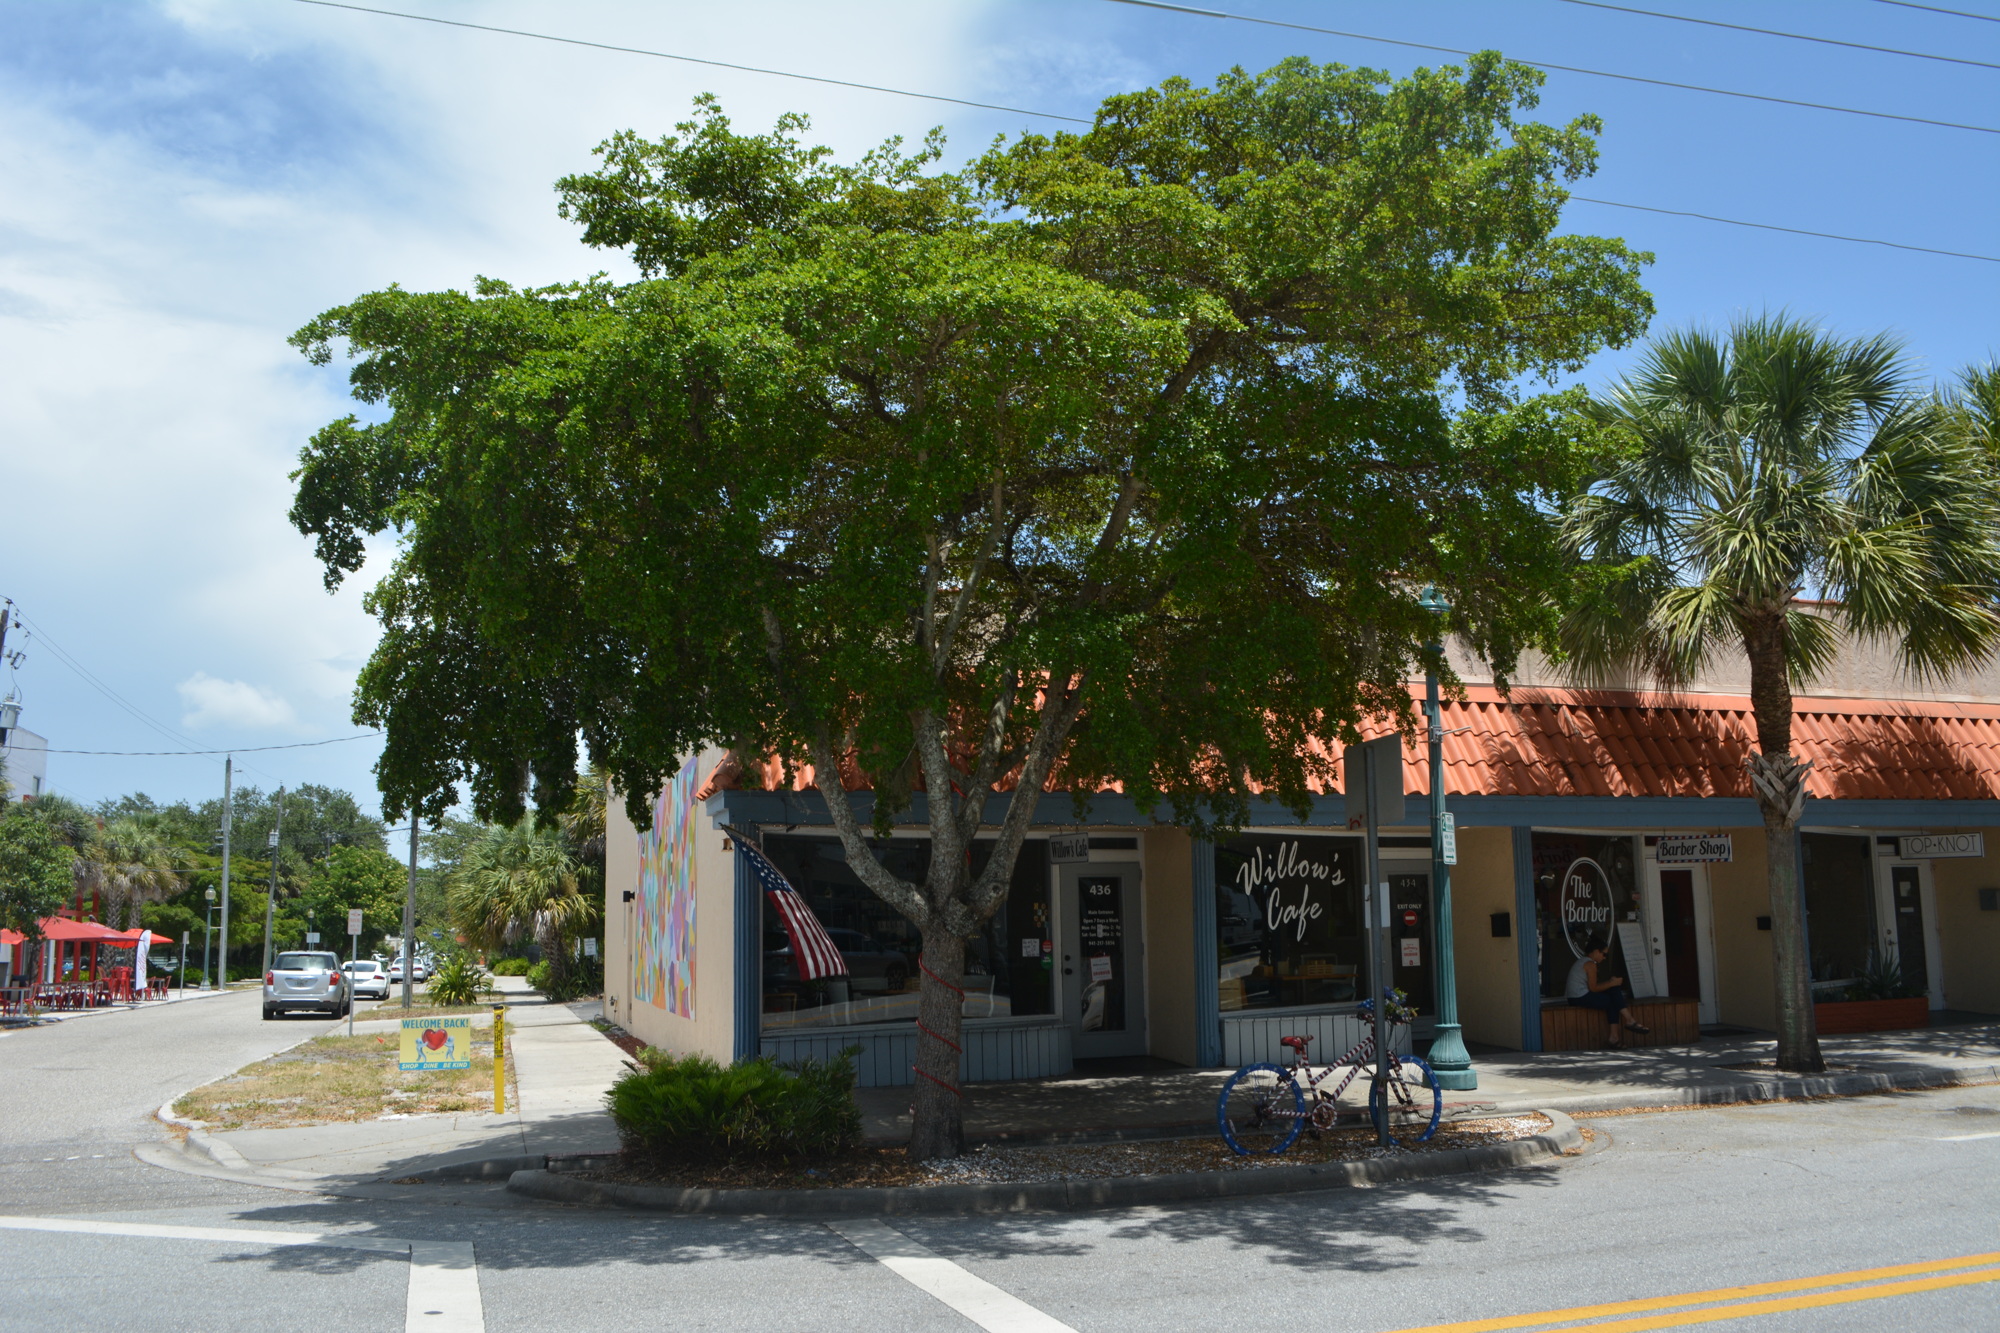 A large oak tree at the corner of Central Avenue and Fifth Street was a themeatically fitting selling point when Whitney Willis was looking for a place to open Willow’s Café.